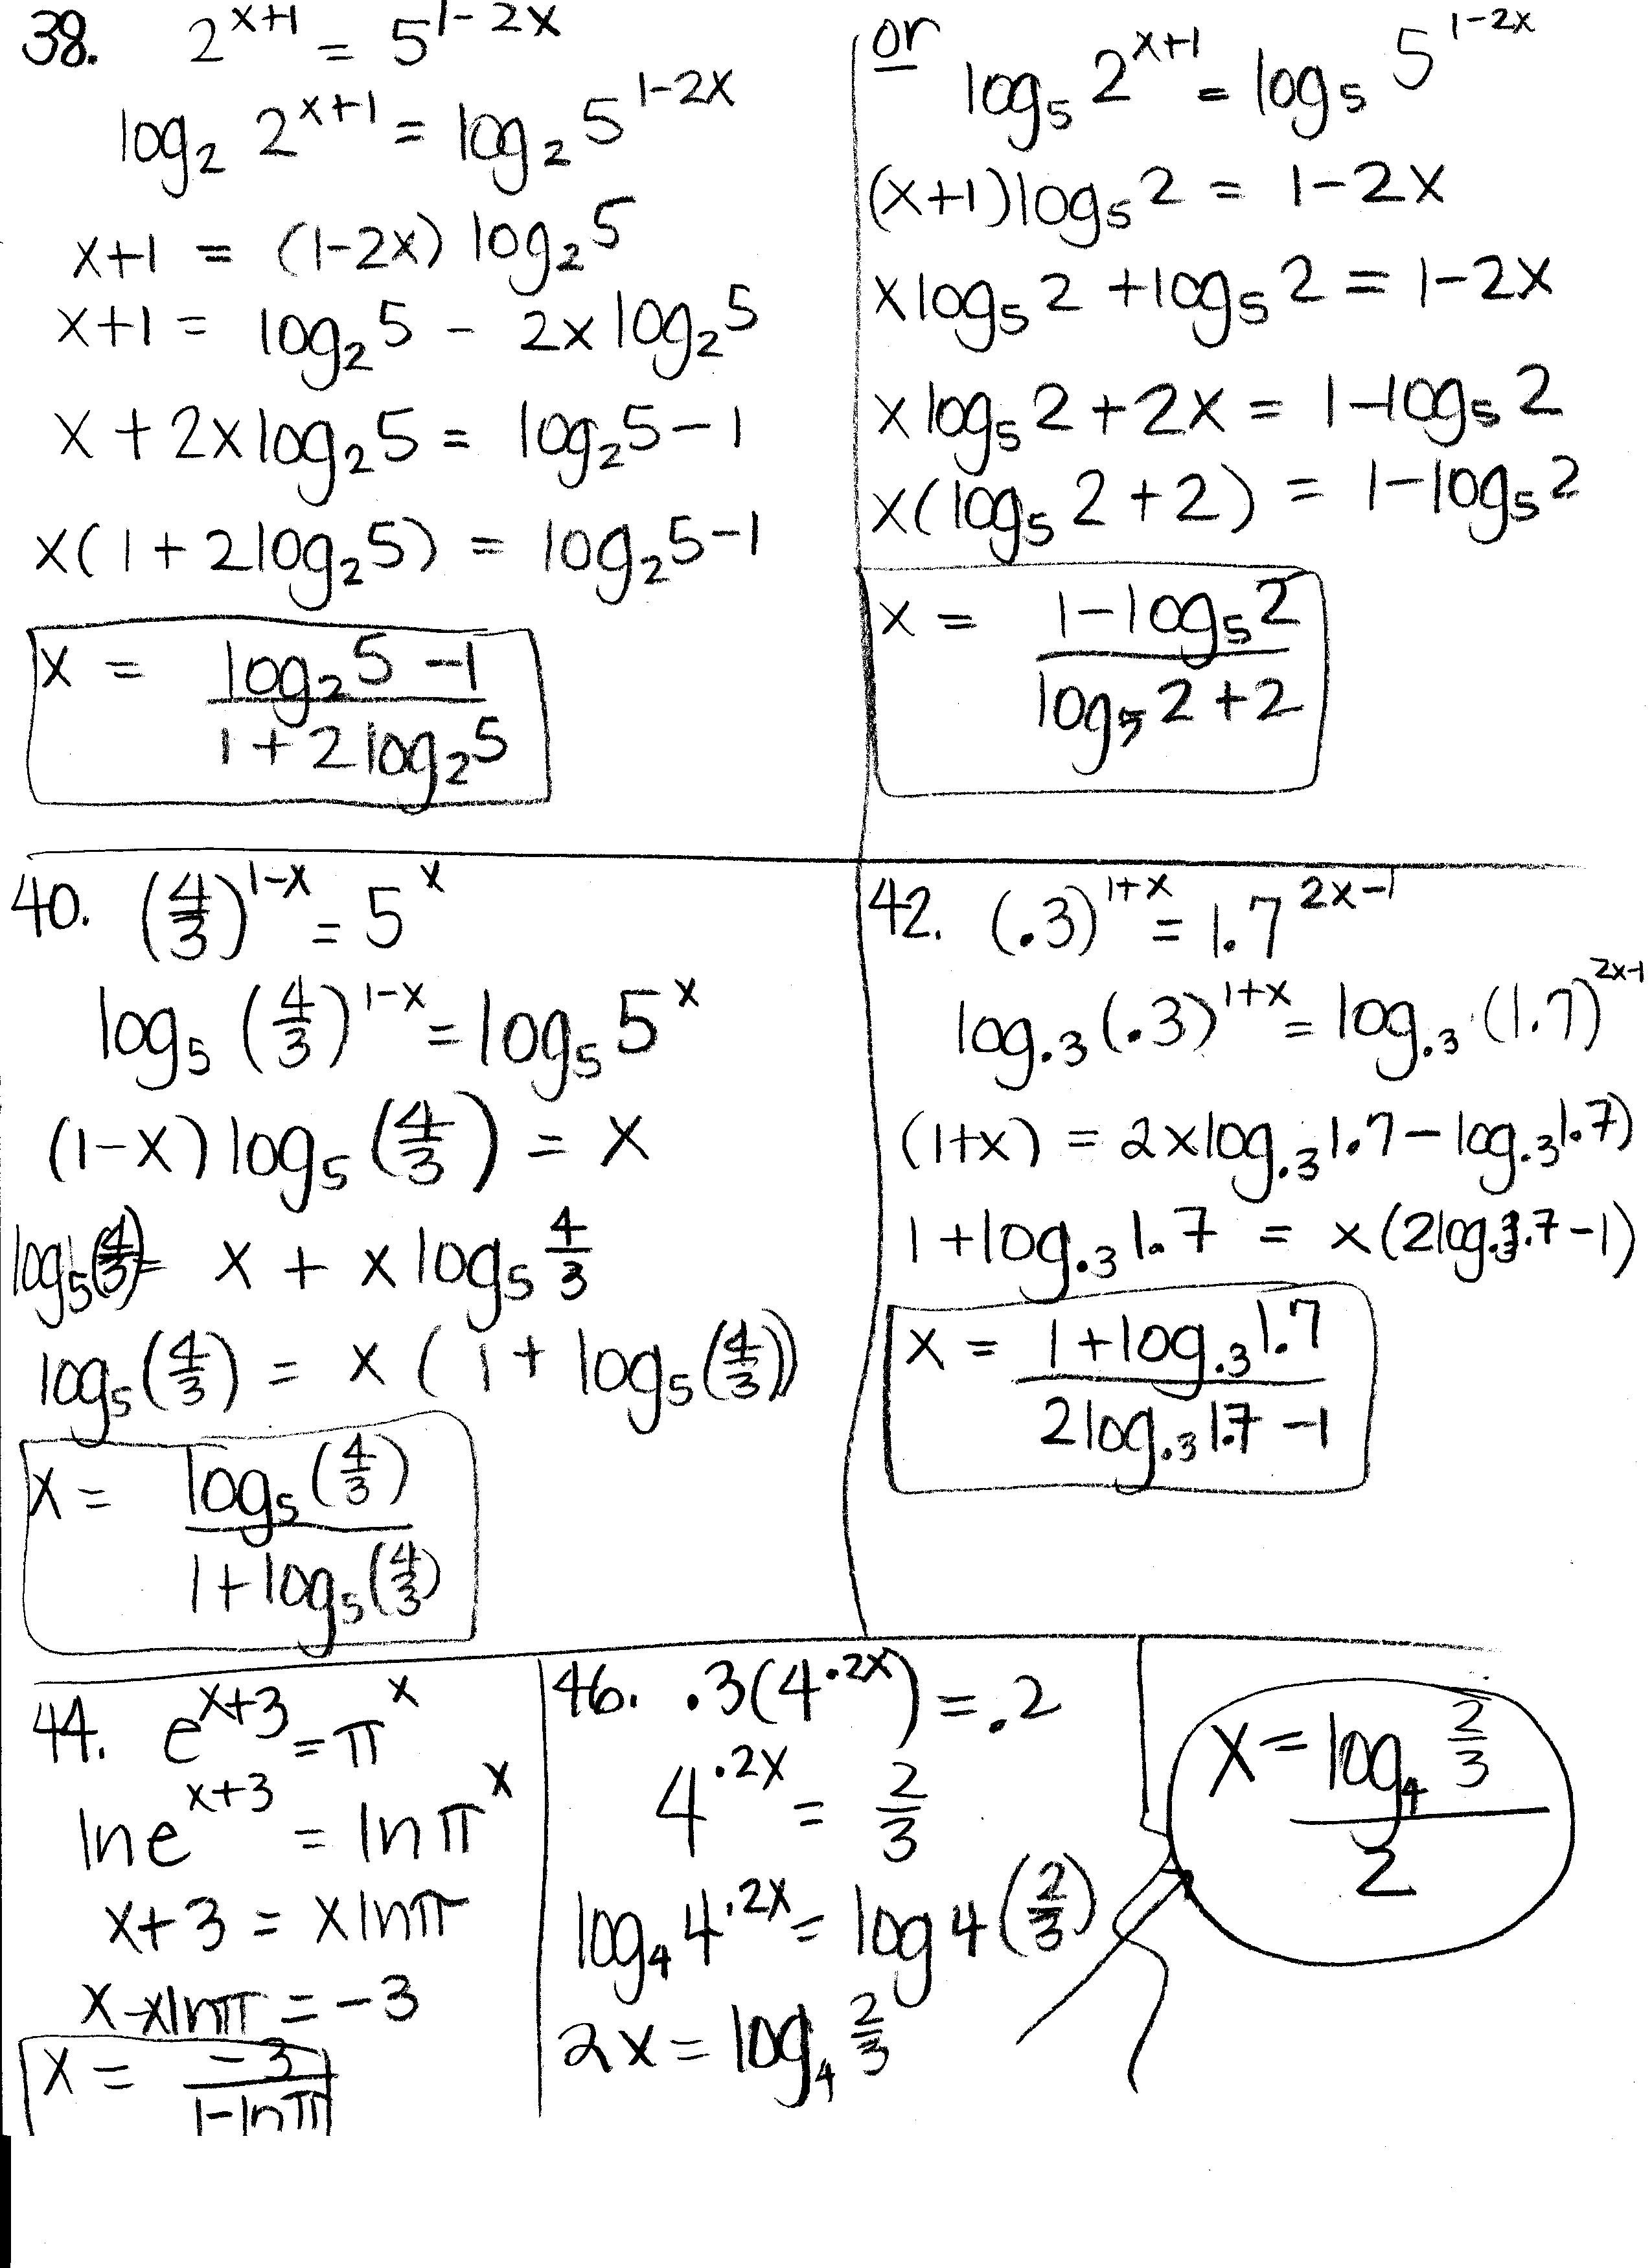 Solving Logarithmic Equations Worksheet With Answers The Best For Logarithmic Equations Worksheet With Answers